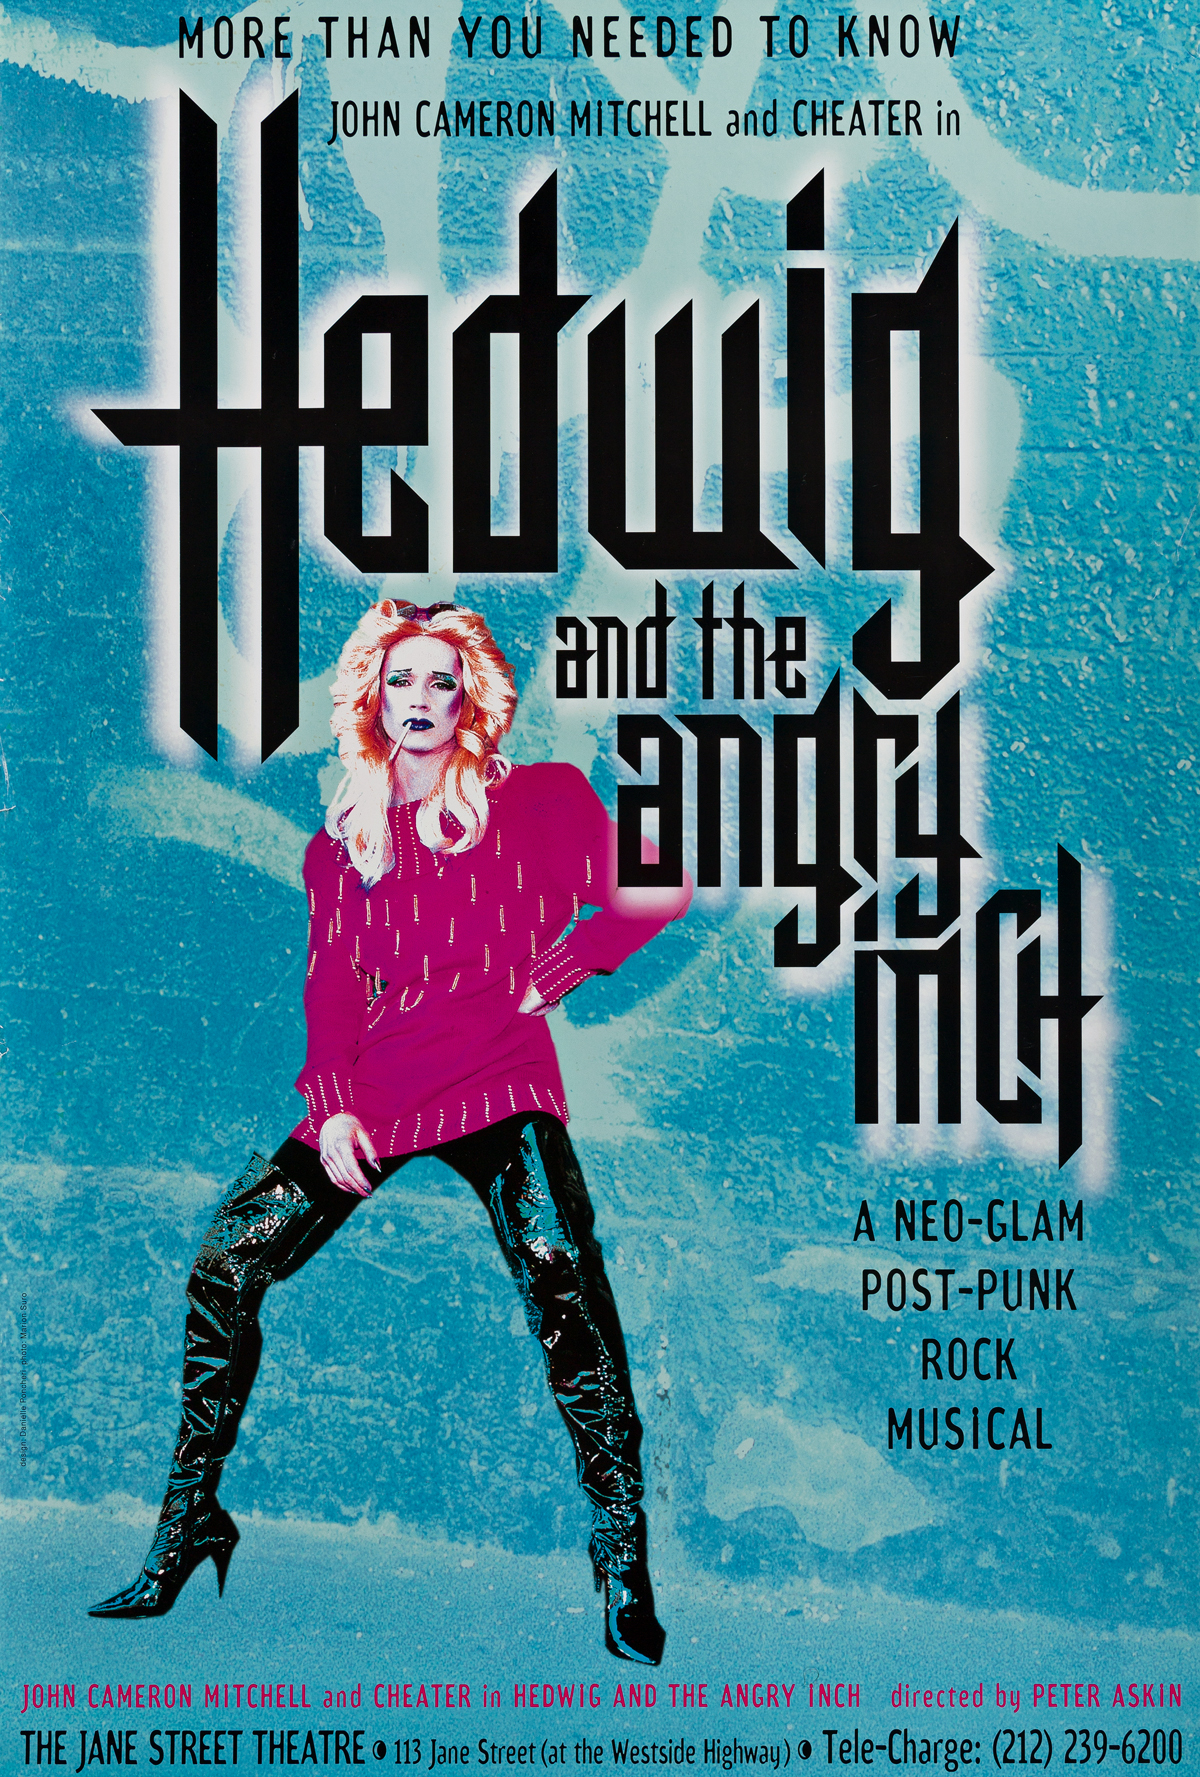 DANIELLE PONCHERI, MARION SURO Hedwig and the Angry Inch.